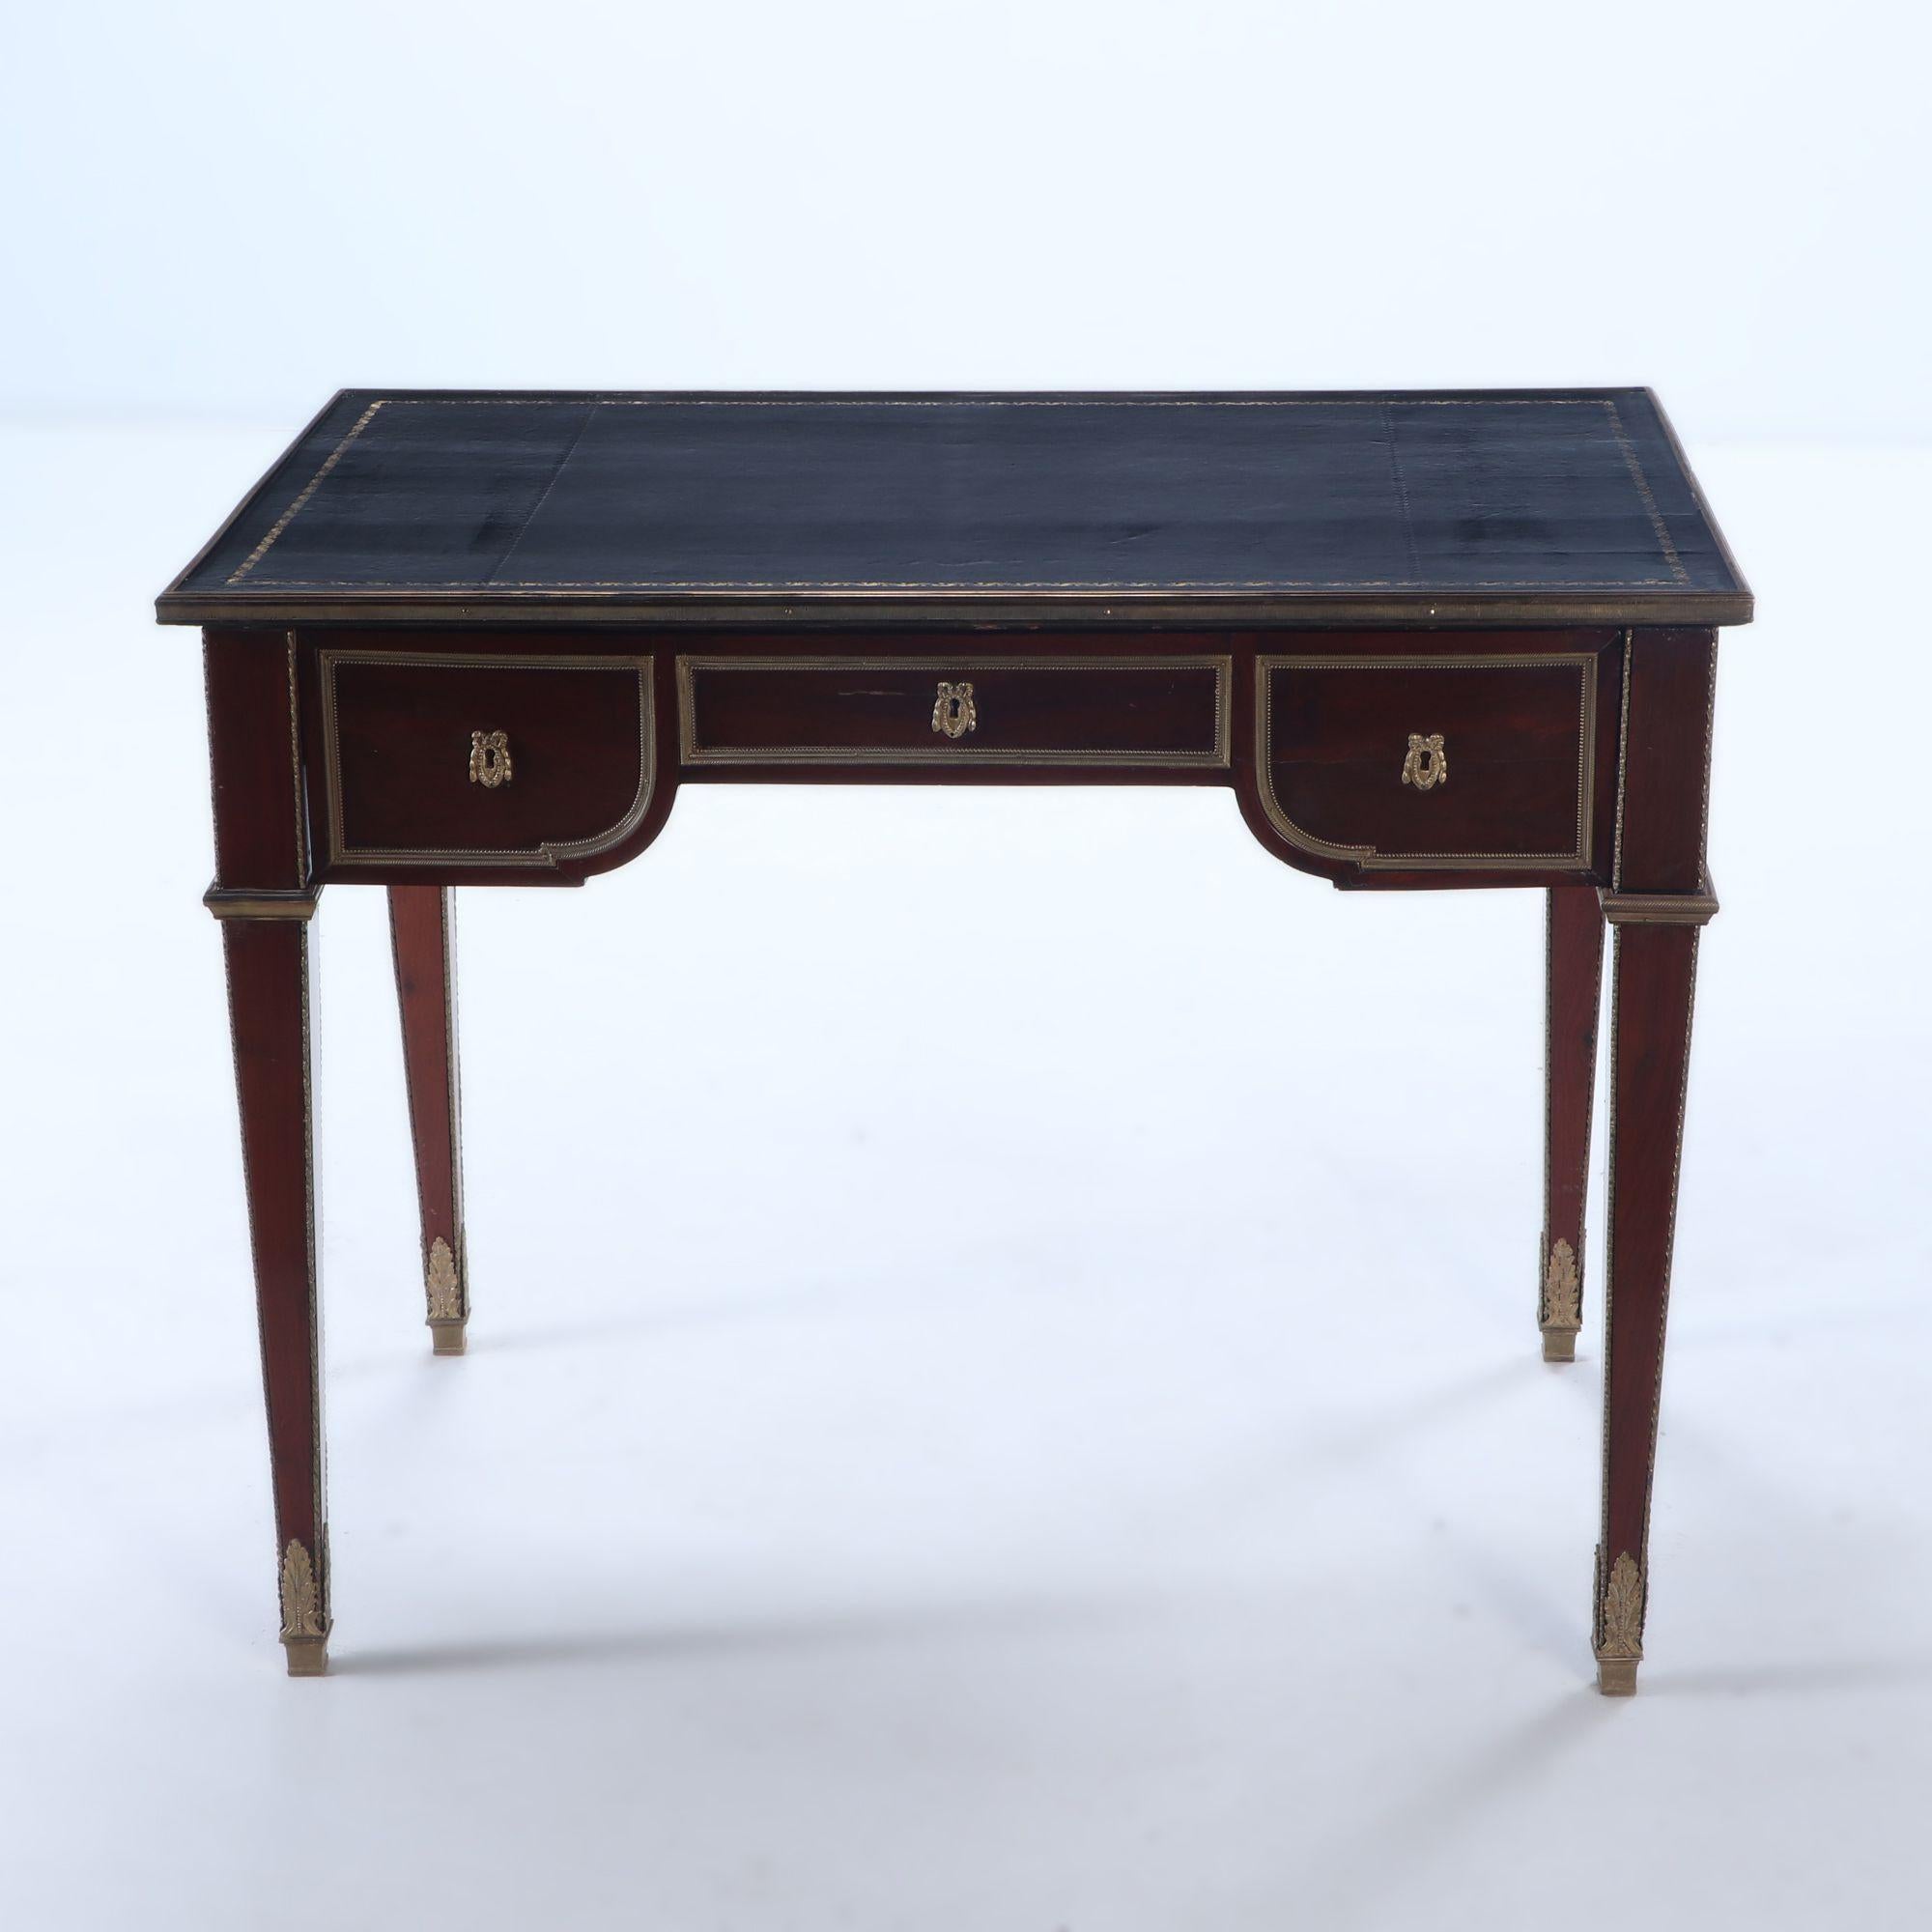 A Louis XVI style French three drawer mahogany bureau plat desk having extensive bronze decoration, finished rear and gilt embossed leather top circa 1930.
Kneehole Dimensions: 26